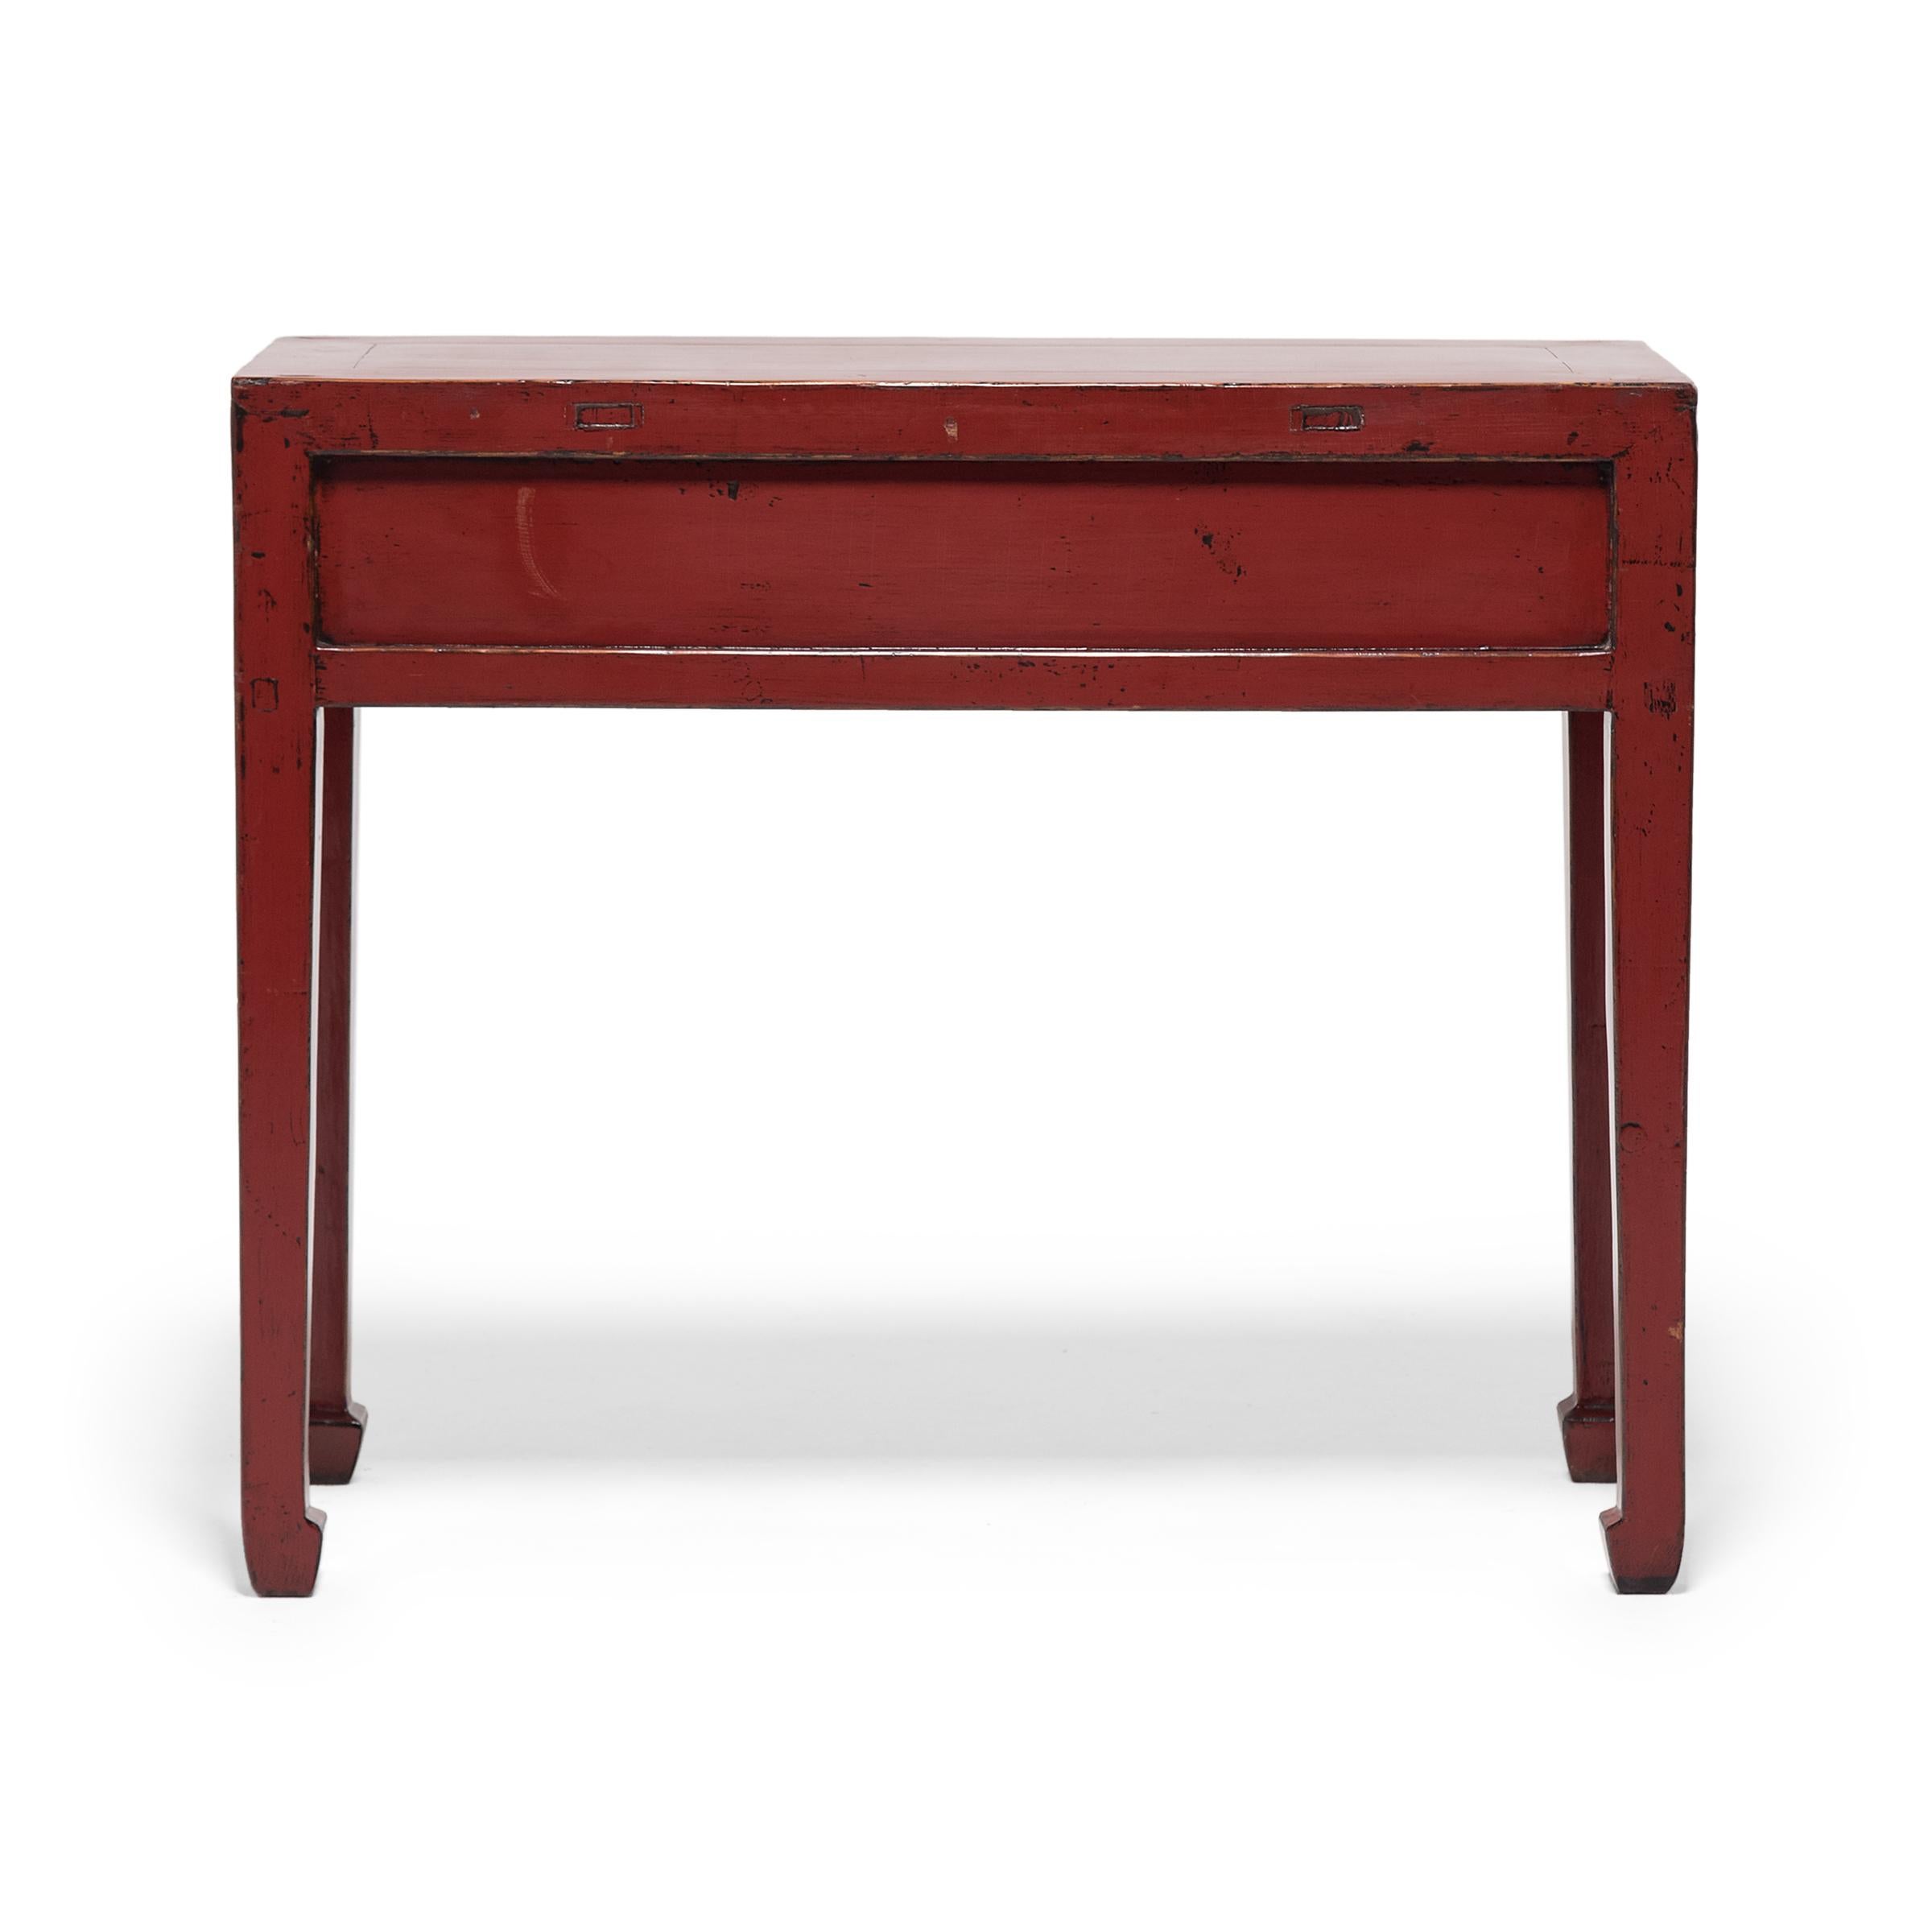 Lacquered Chinese Cinnabar Incense Table, c. 1900